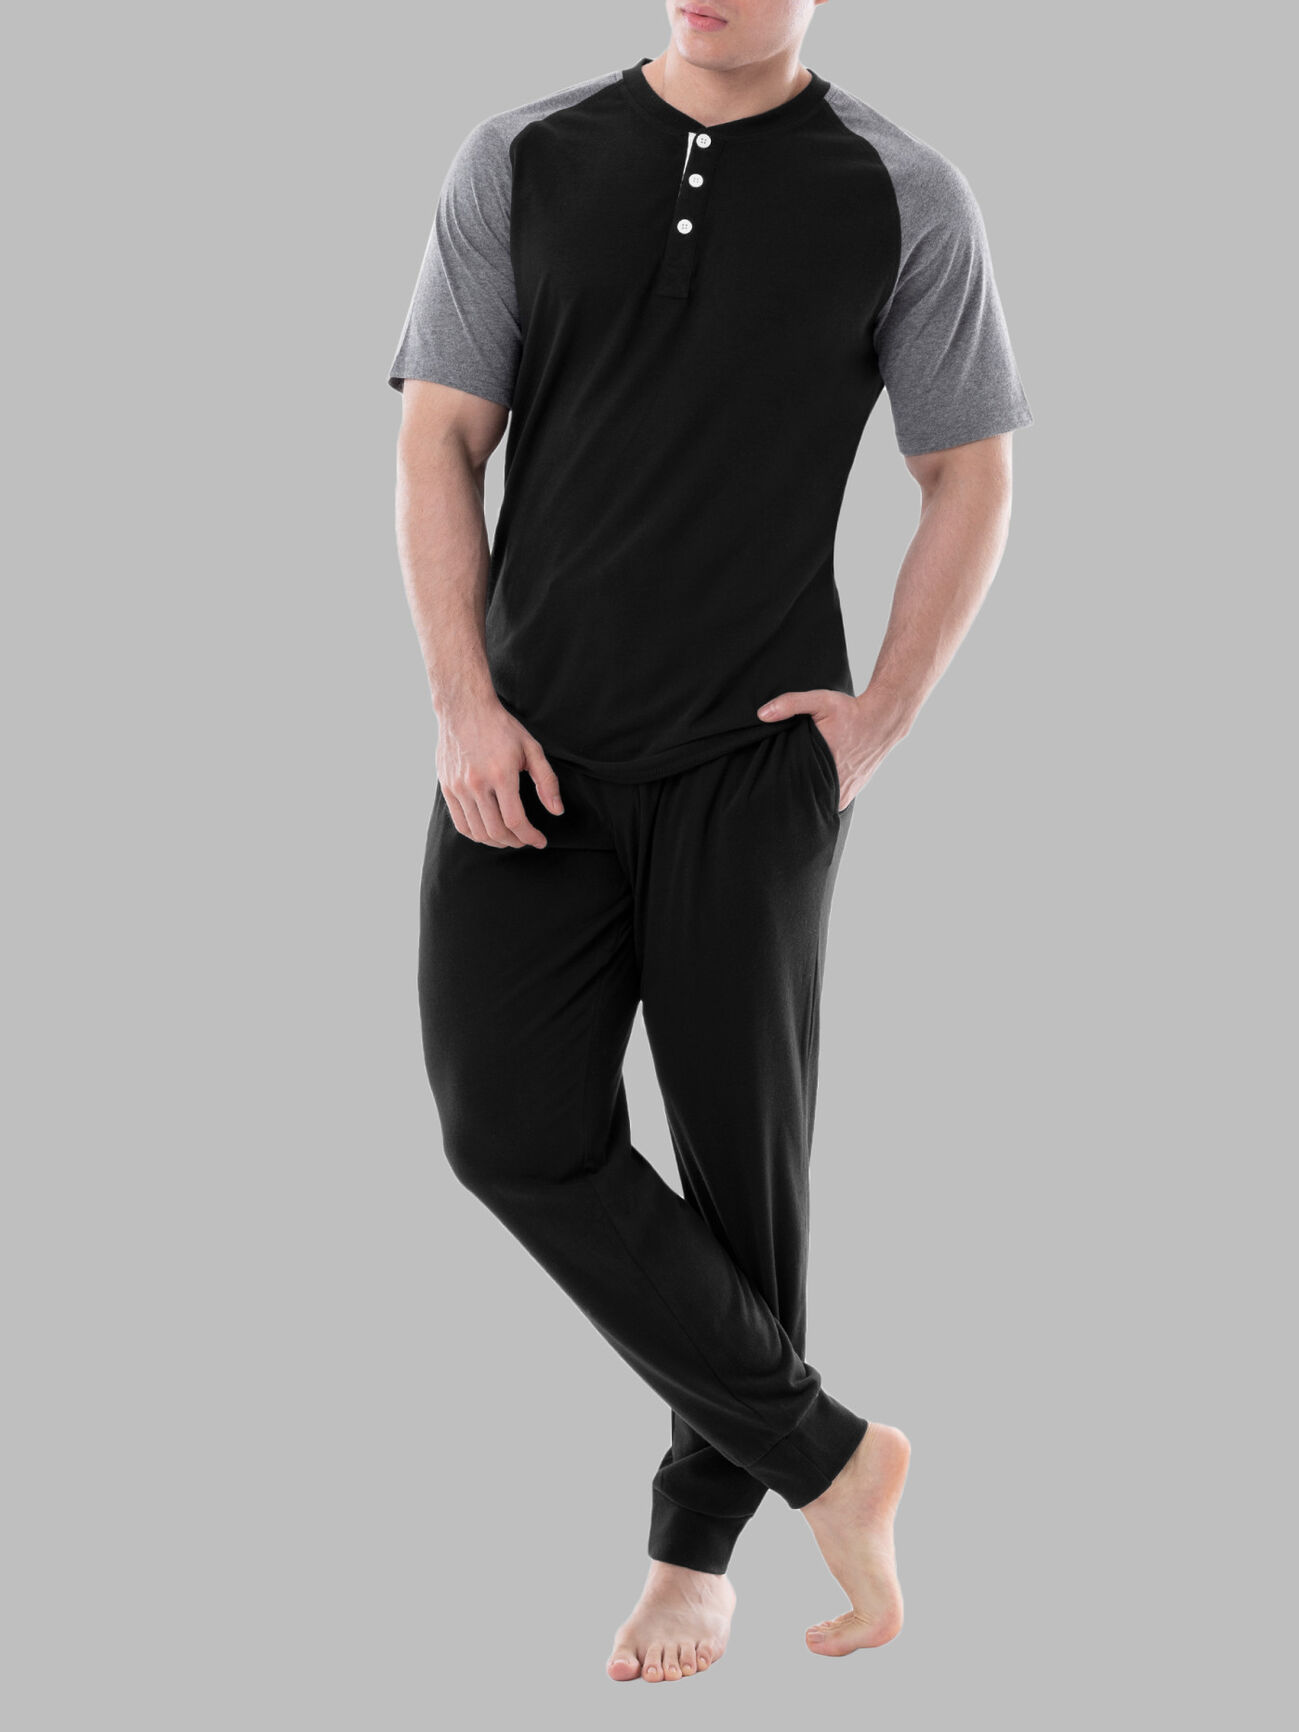 Fruit of the Loom Men's Jersey Short Sleeve Henley Top and Jogger Pant, 2 Piece Set BLACK/GREY HEATHER